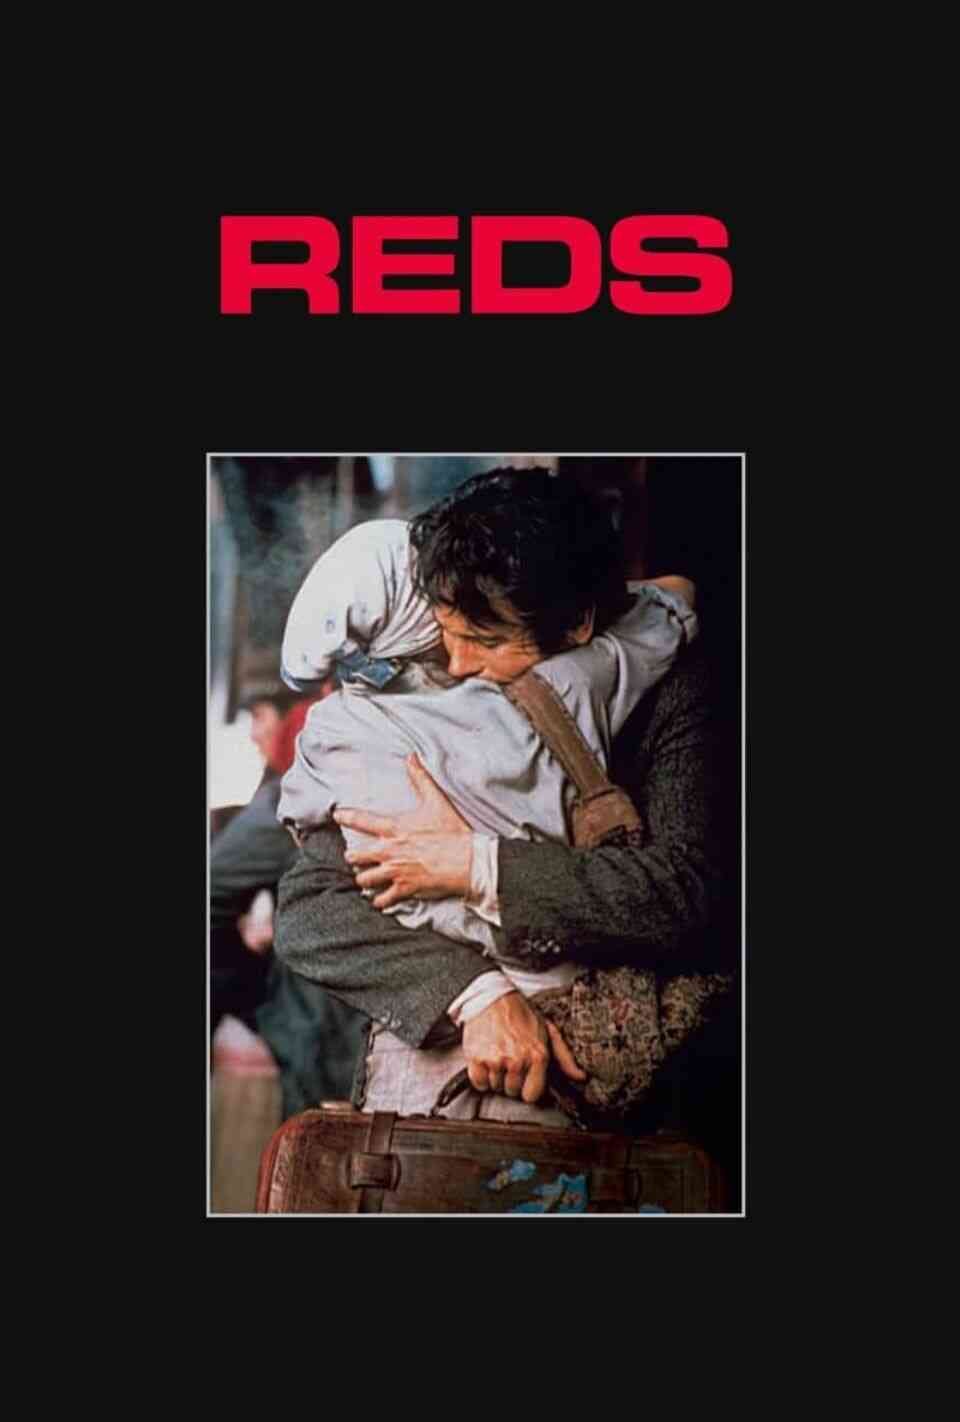 Read Reds screenplay (poster)